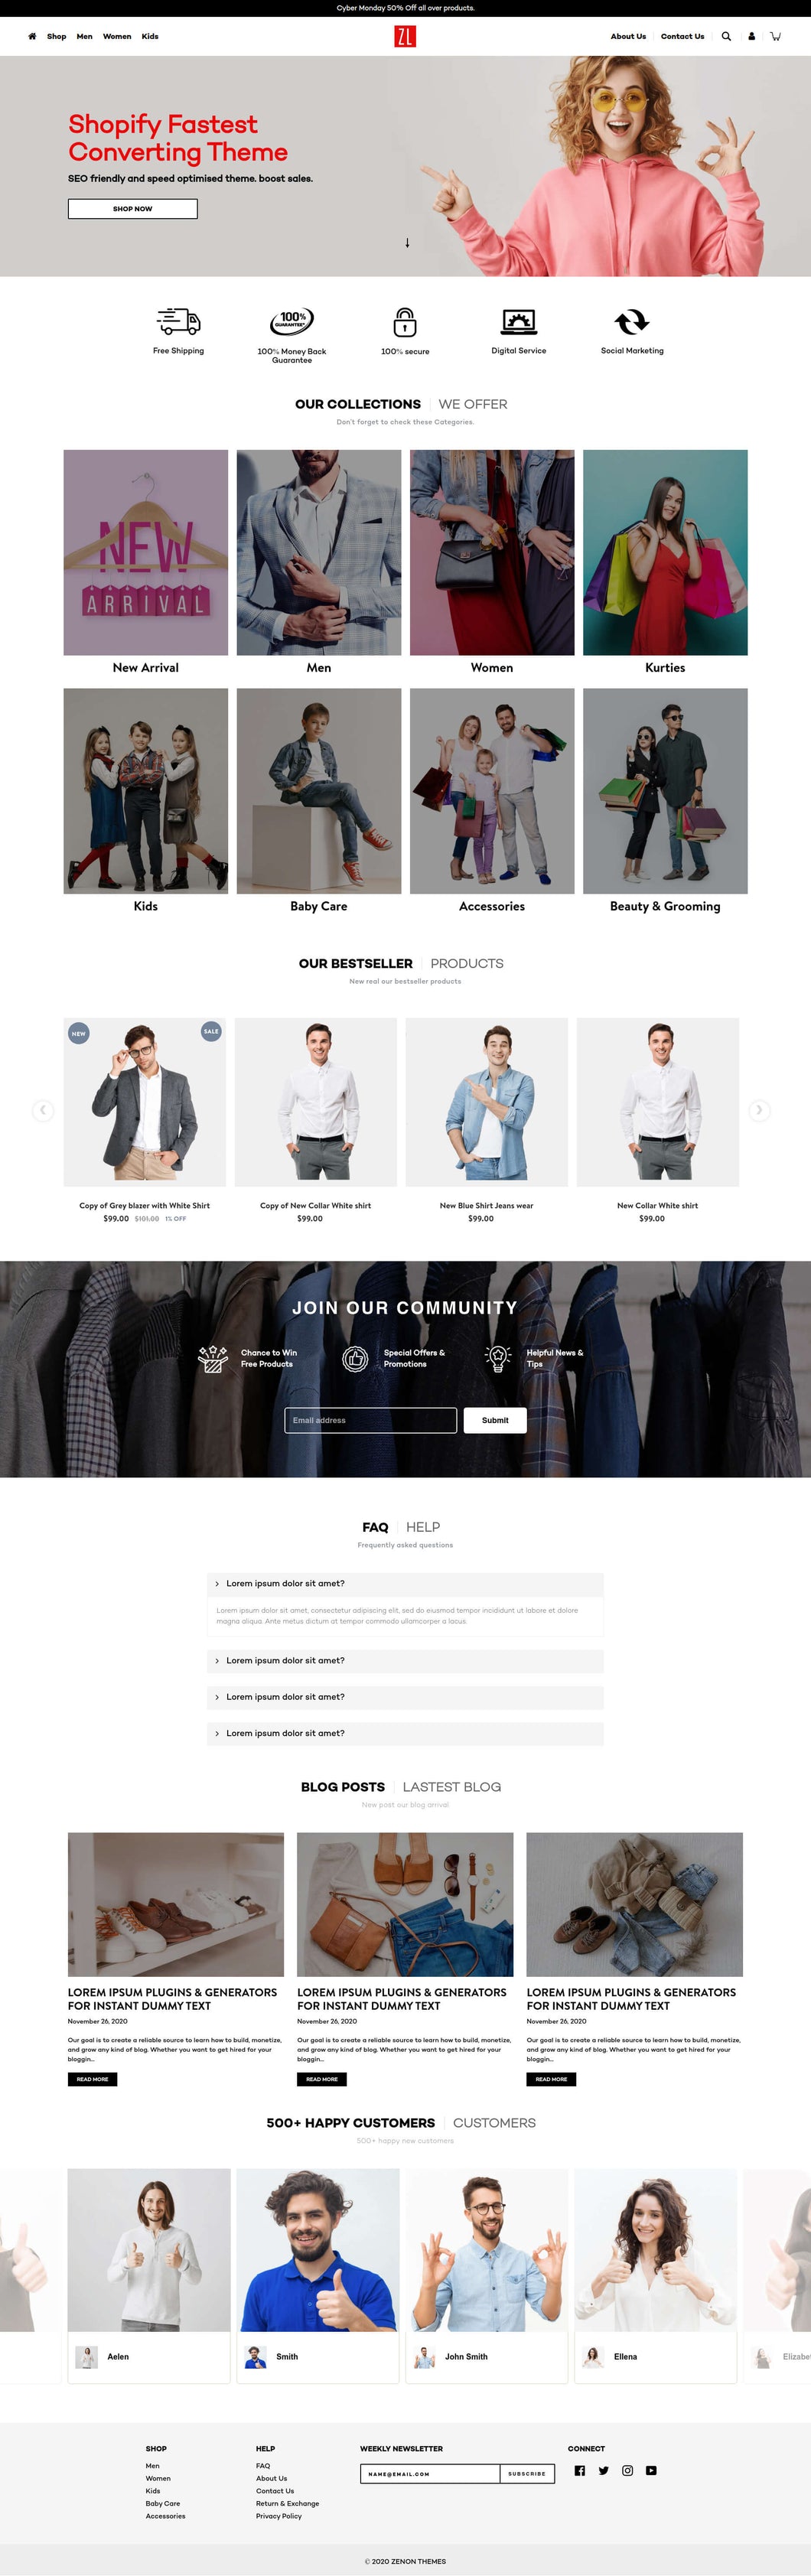 Shopify Best Themes